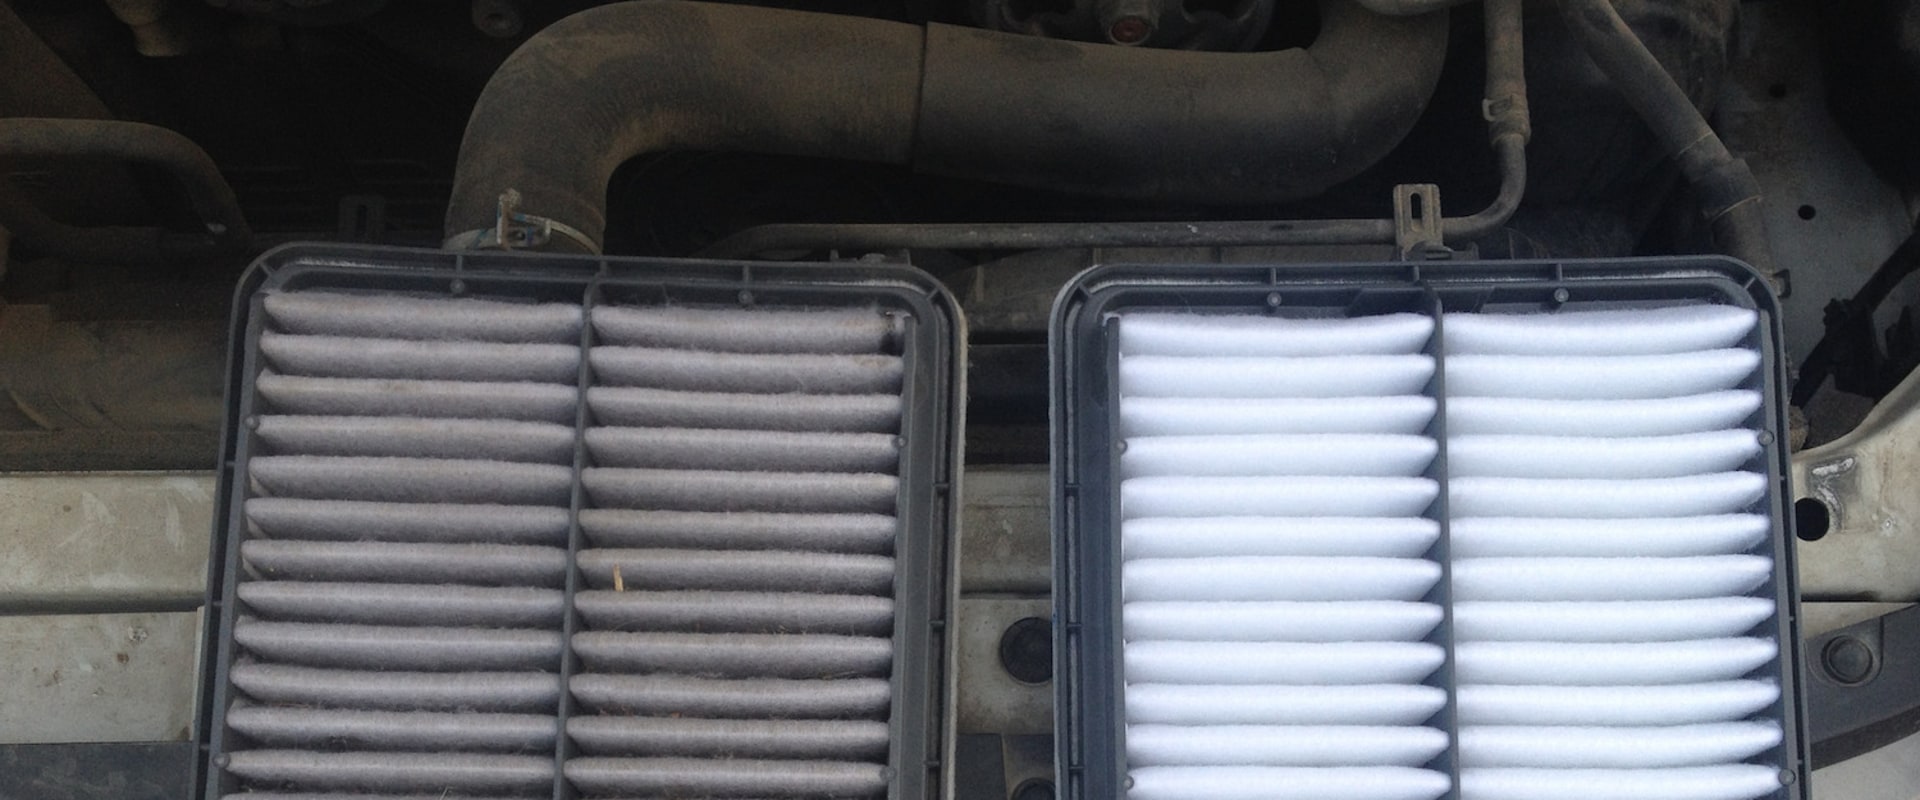 How Dirty is Too Dirty for an Air Filter?